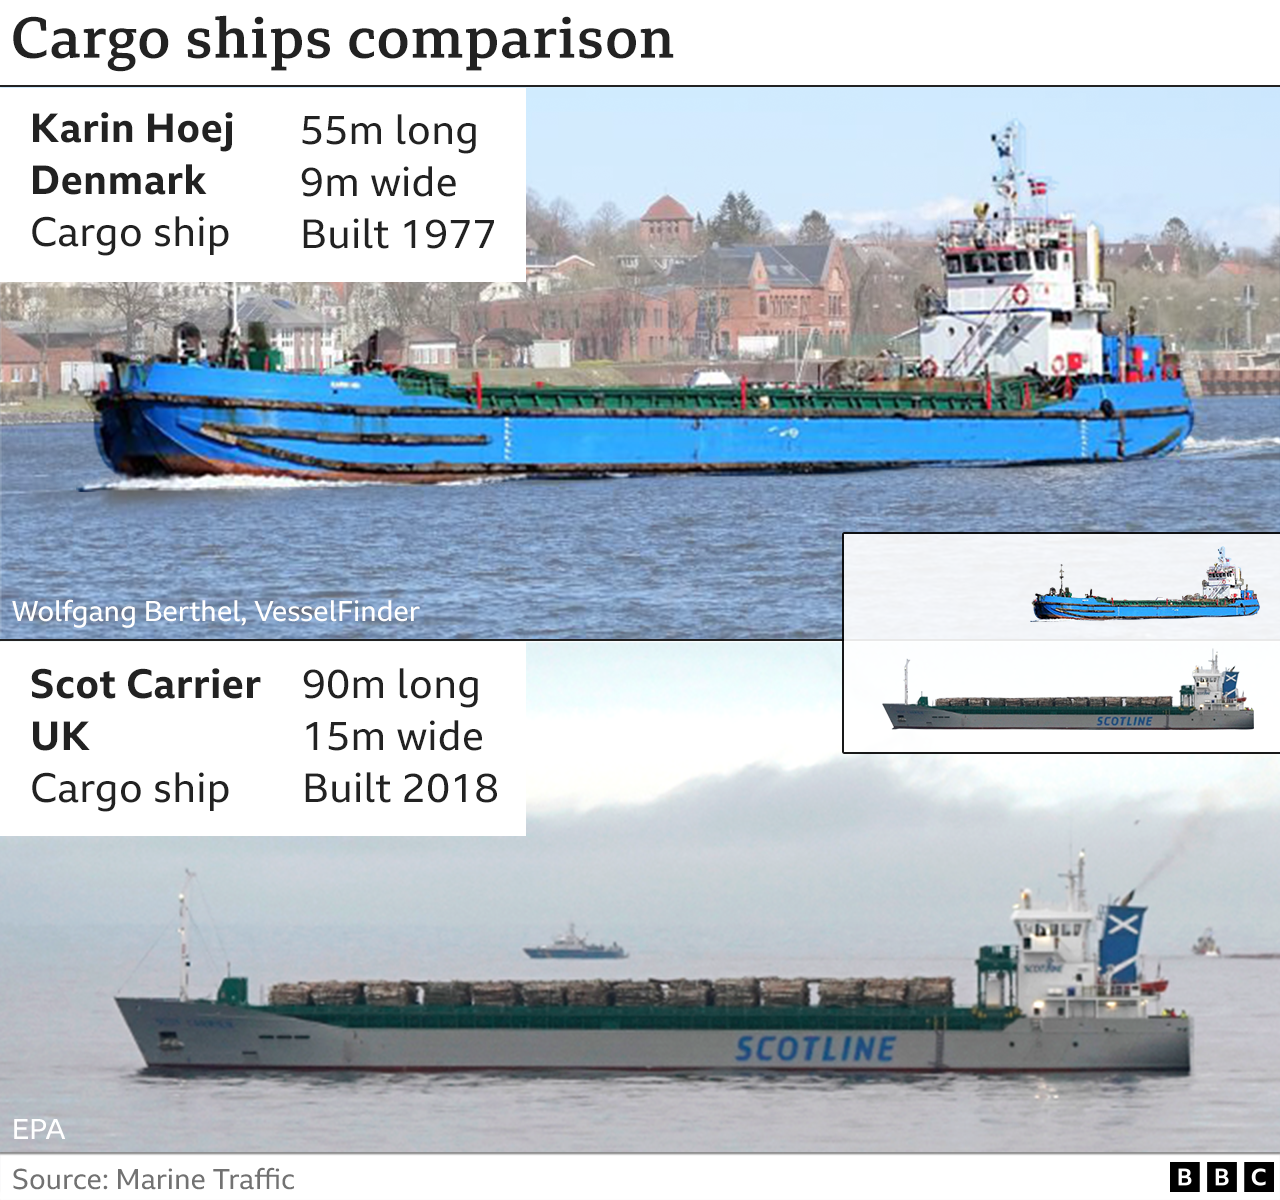 Graphic showing cargo ships comparison